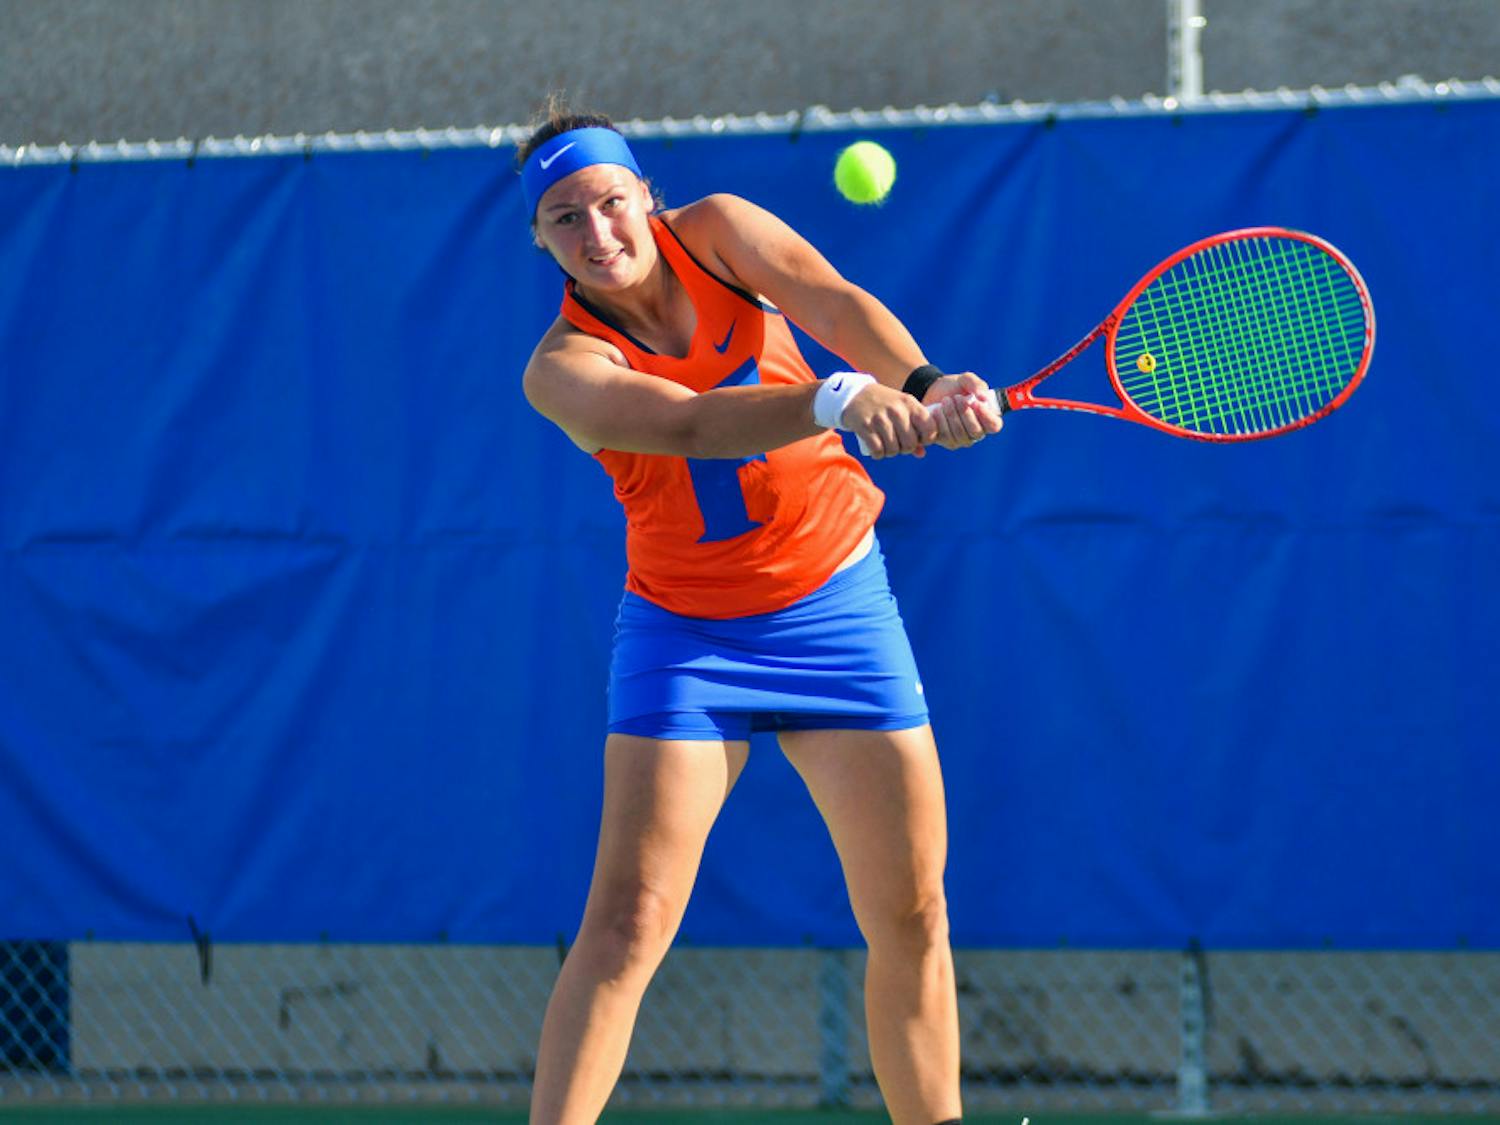 The Gators women's tennis team enters Friday's matchup against Kentucky with three ranked singles players.